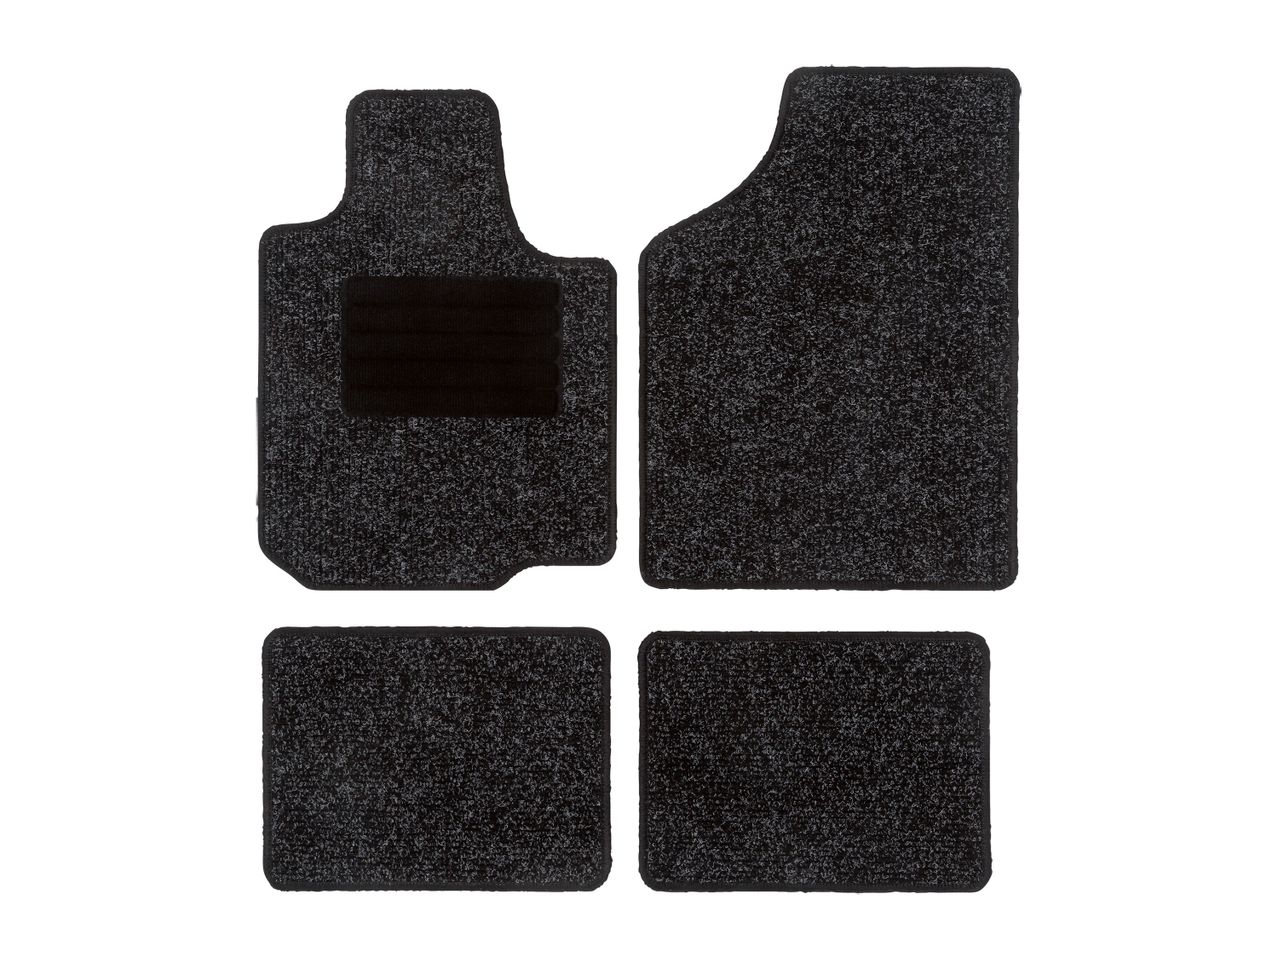 Go to full screen view: Ultimate Speed Car Mat Set - 4-piece set - Image 1